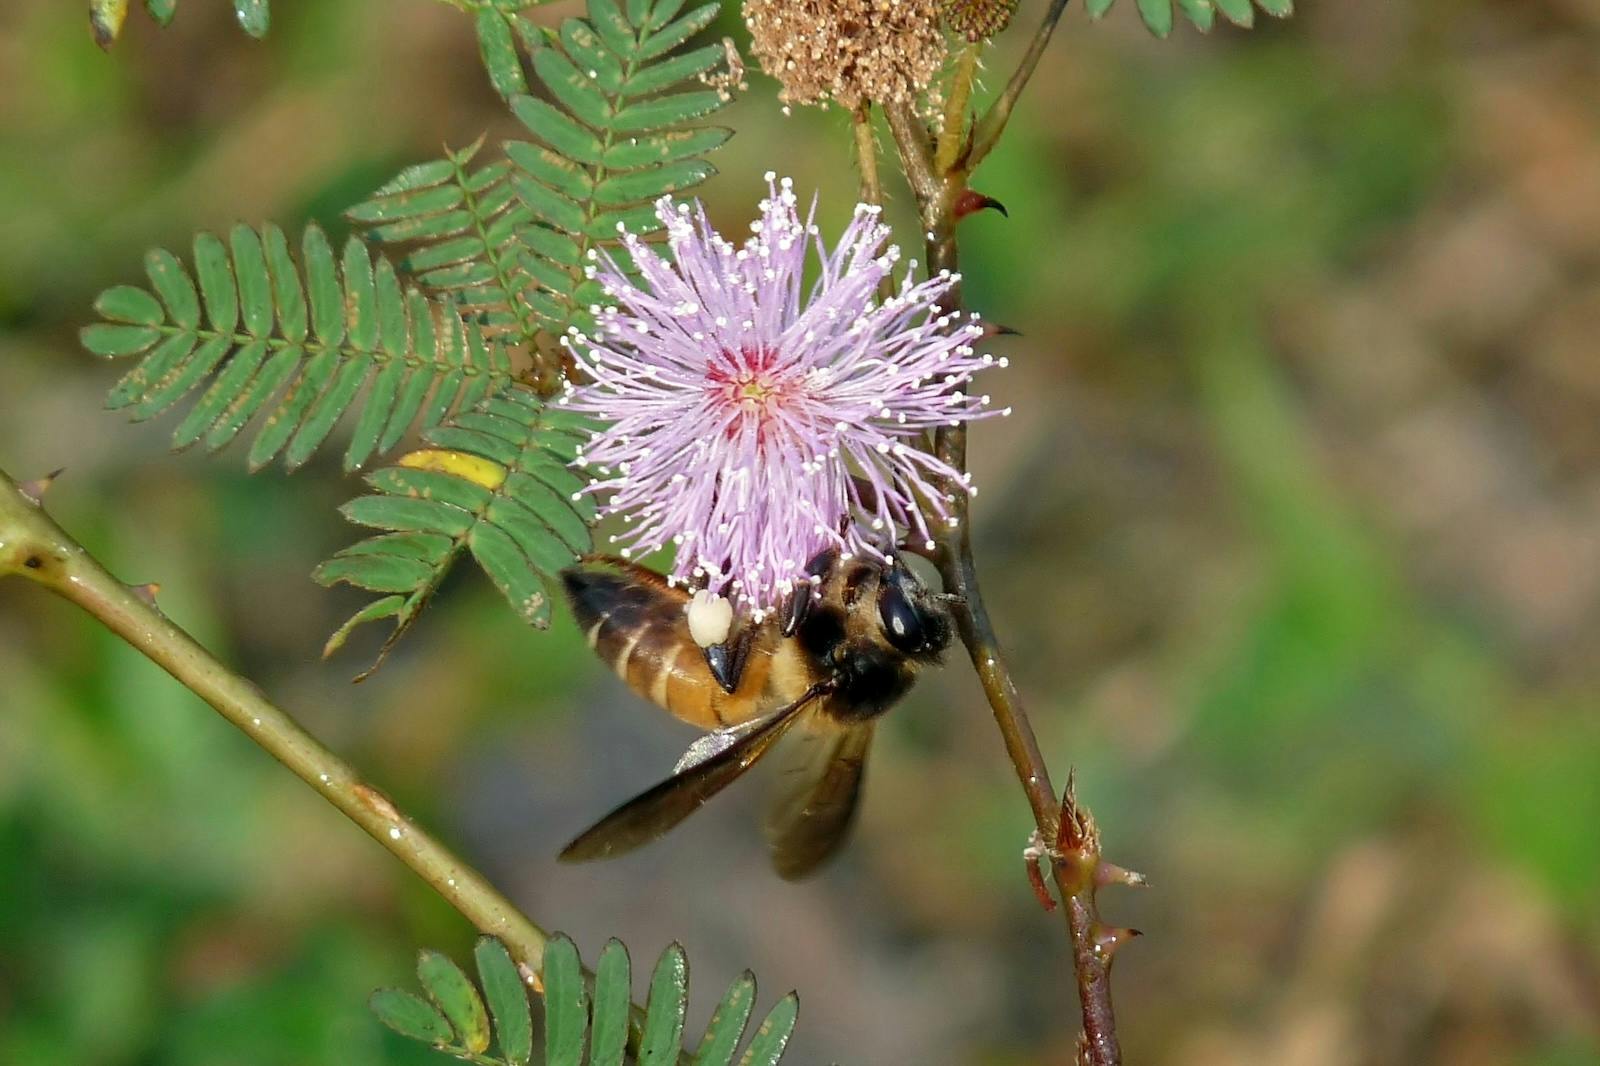 Nearly 90% of wild flowering plants depend on animal pollinators for seed production.